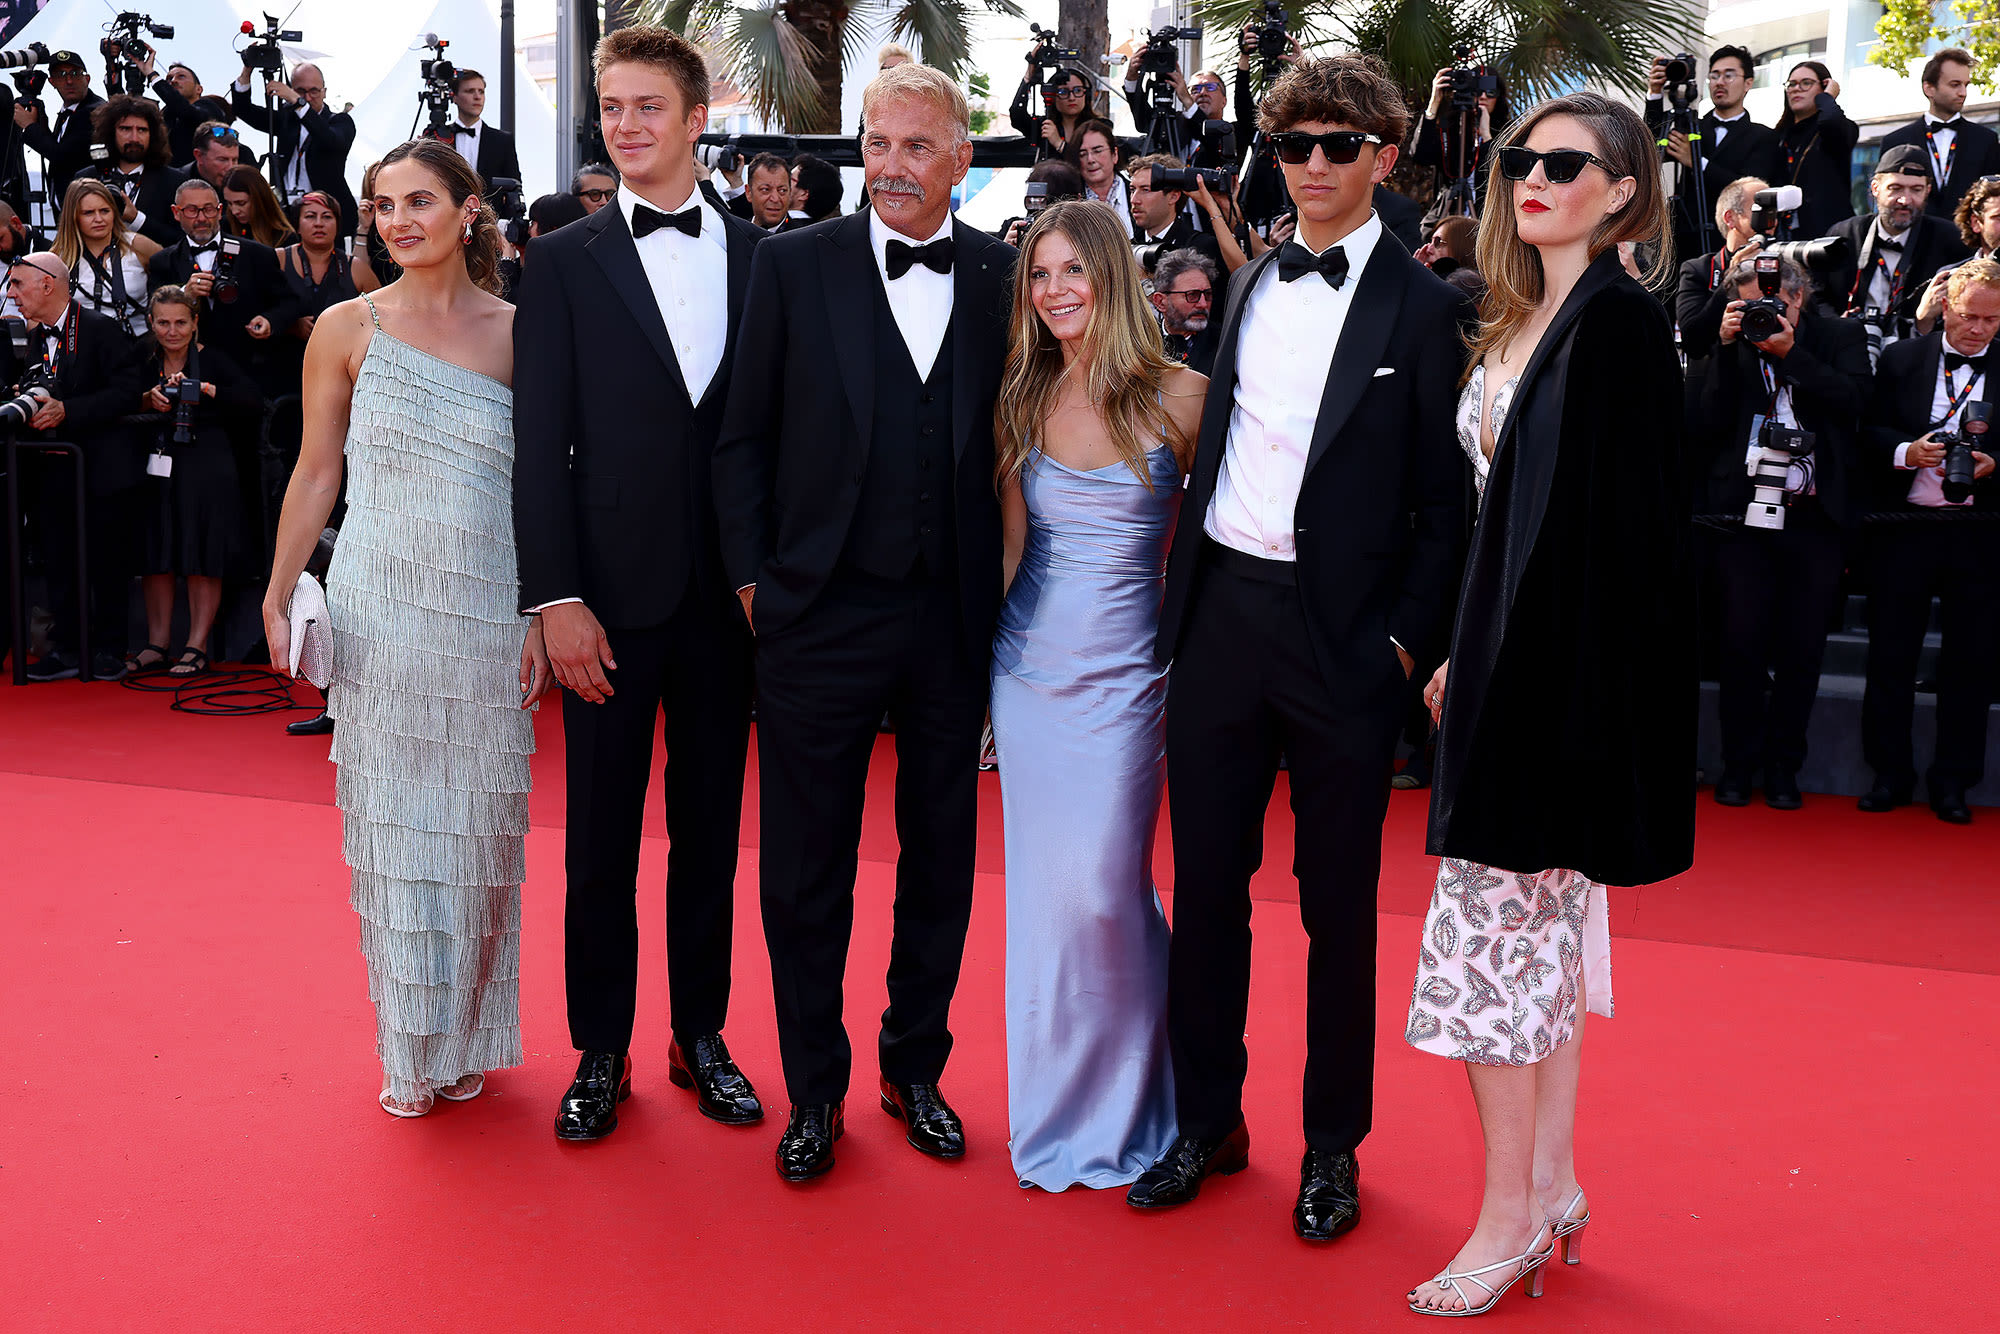 Kevin Costner Brings 5 of His Kids to Cannes Film Festival in Rare Family Outing